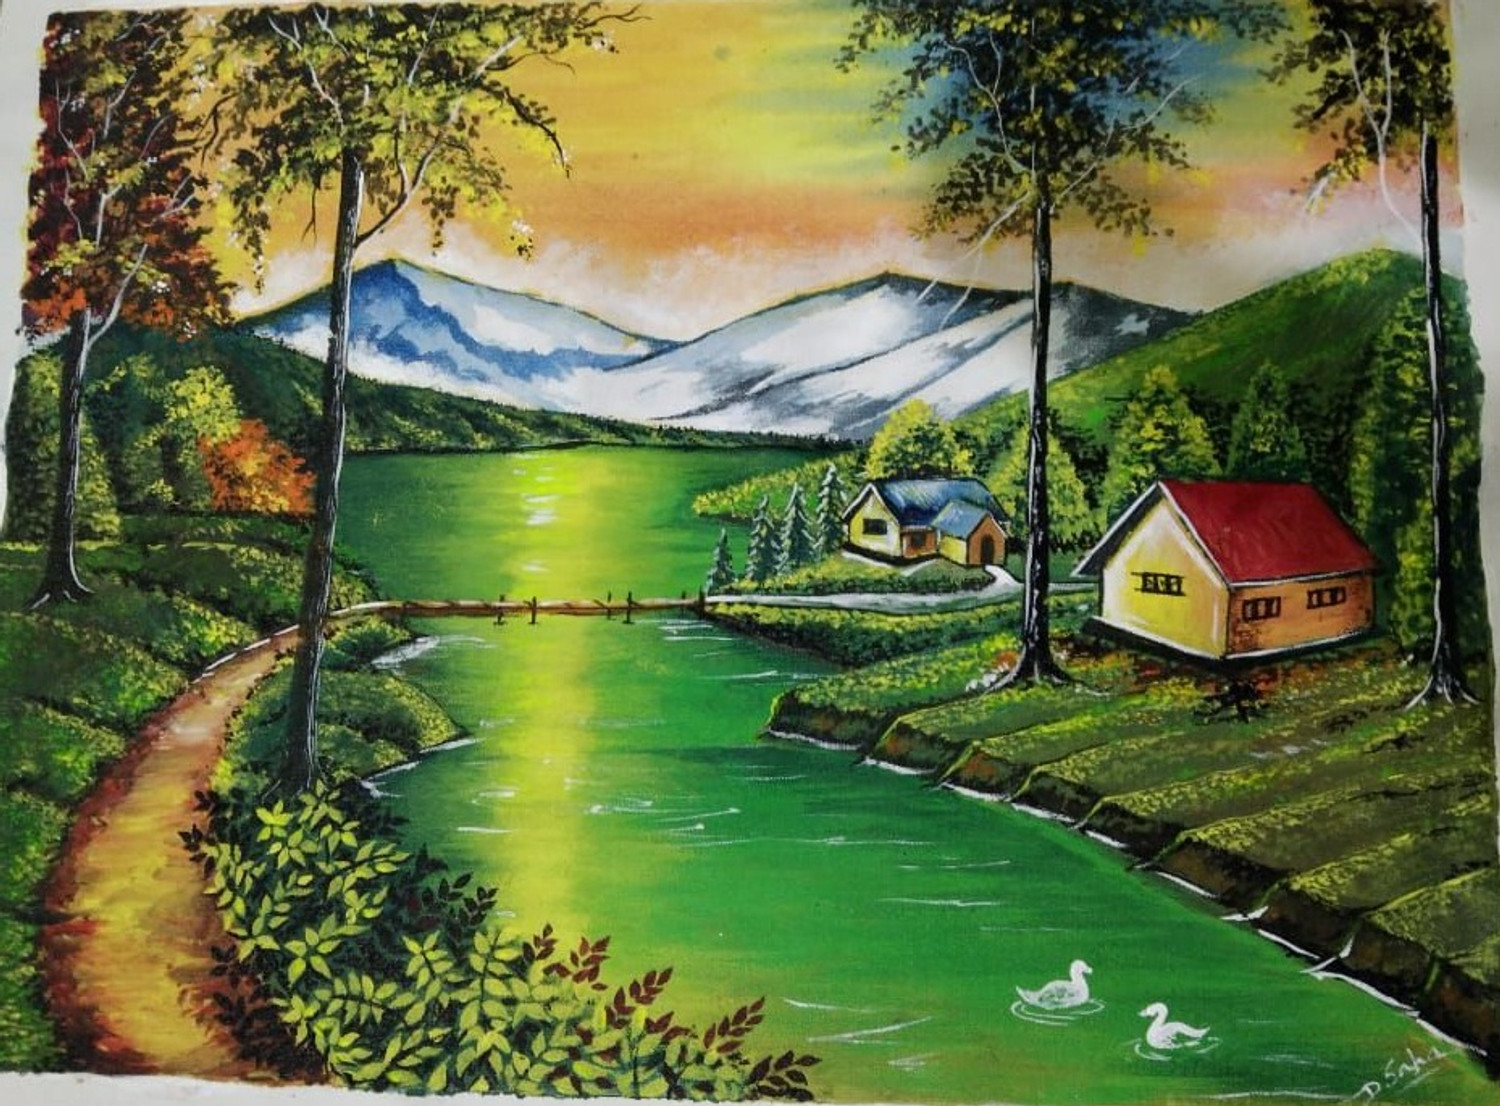 Wall poster of Village with nature Art Oil Painting Poster | Office Wall  Decorative Poster | Village Art painting (Without Frame) Paper Print - Art  & Paintings, Nature, Decorative posters in India -